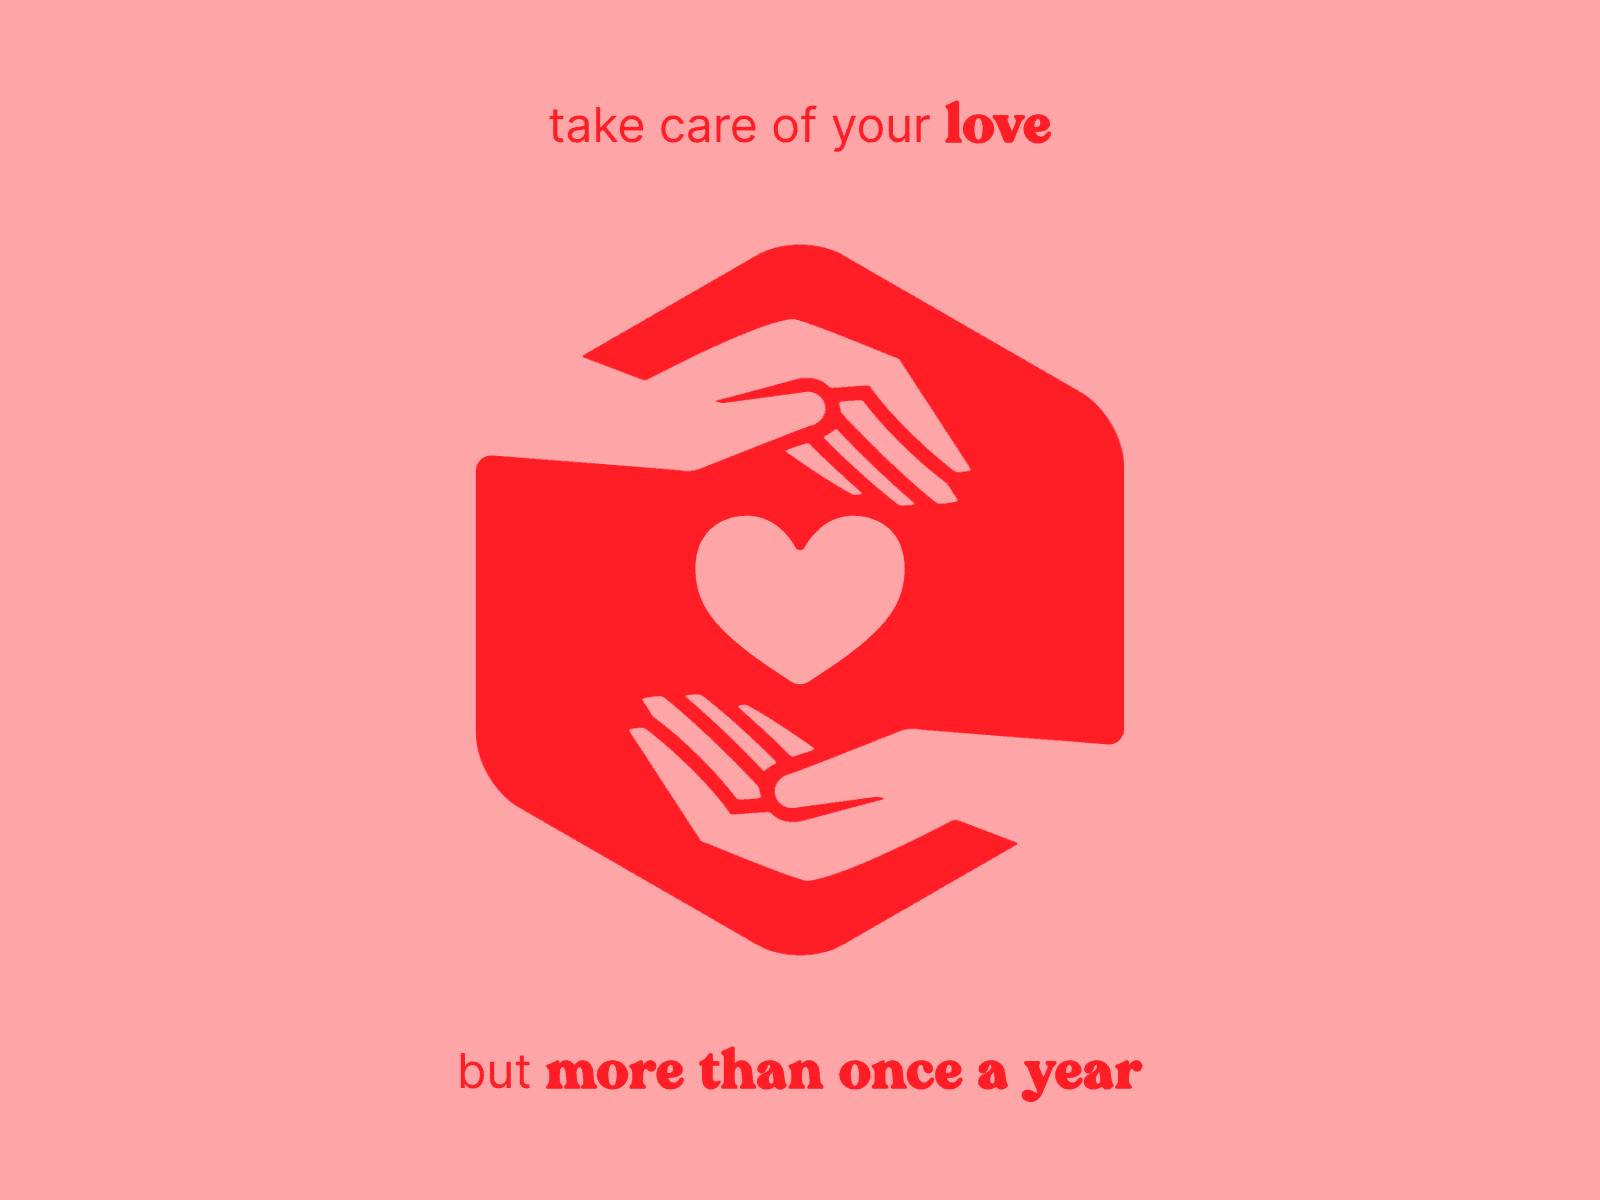 Take care of your love! after effects animation branding care hands heart heart shape logo logo animation love motion motion graphics red sign valentine valentines day vector animation